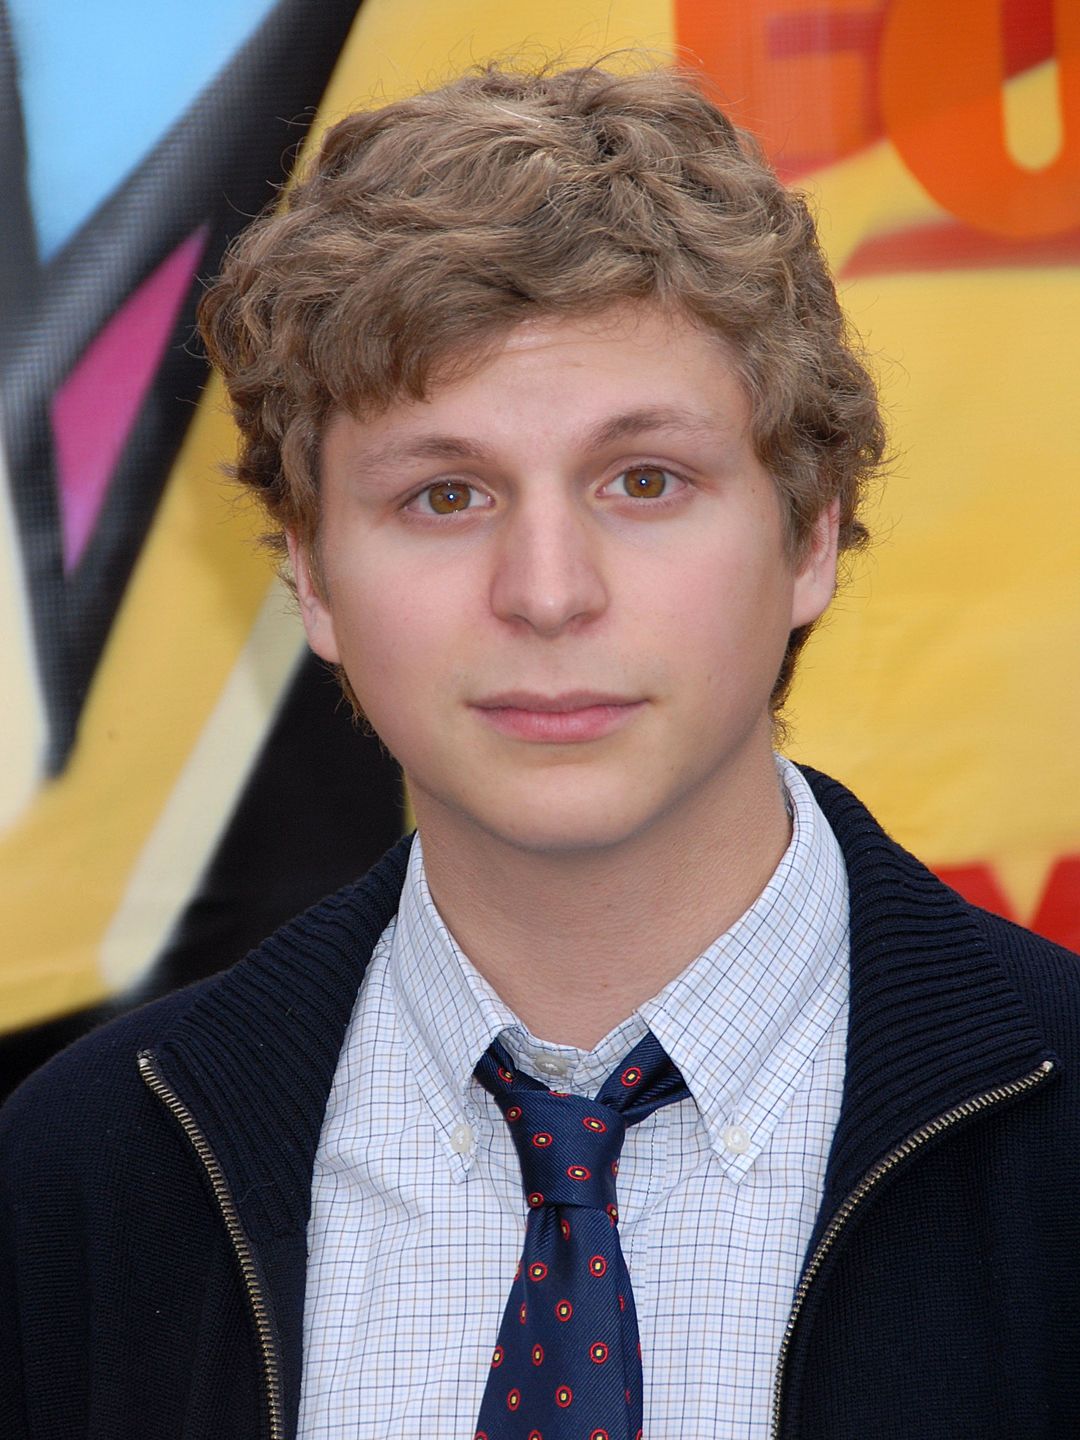 Michael Cera who is he